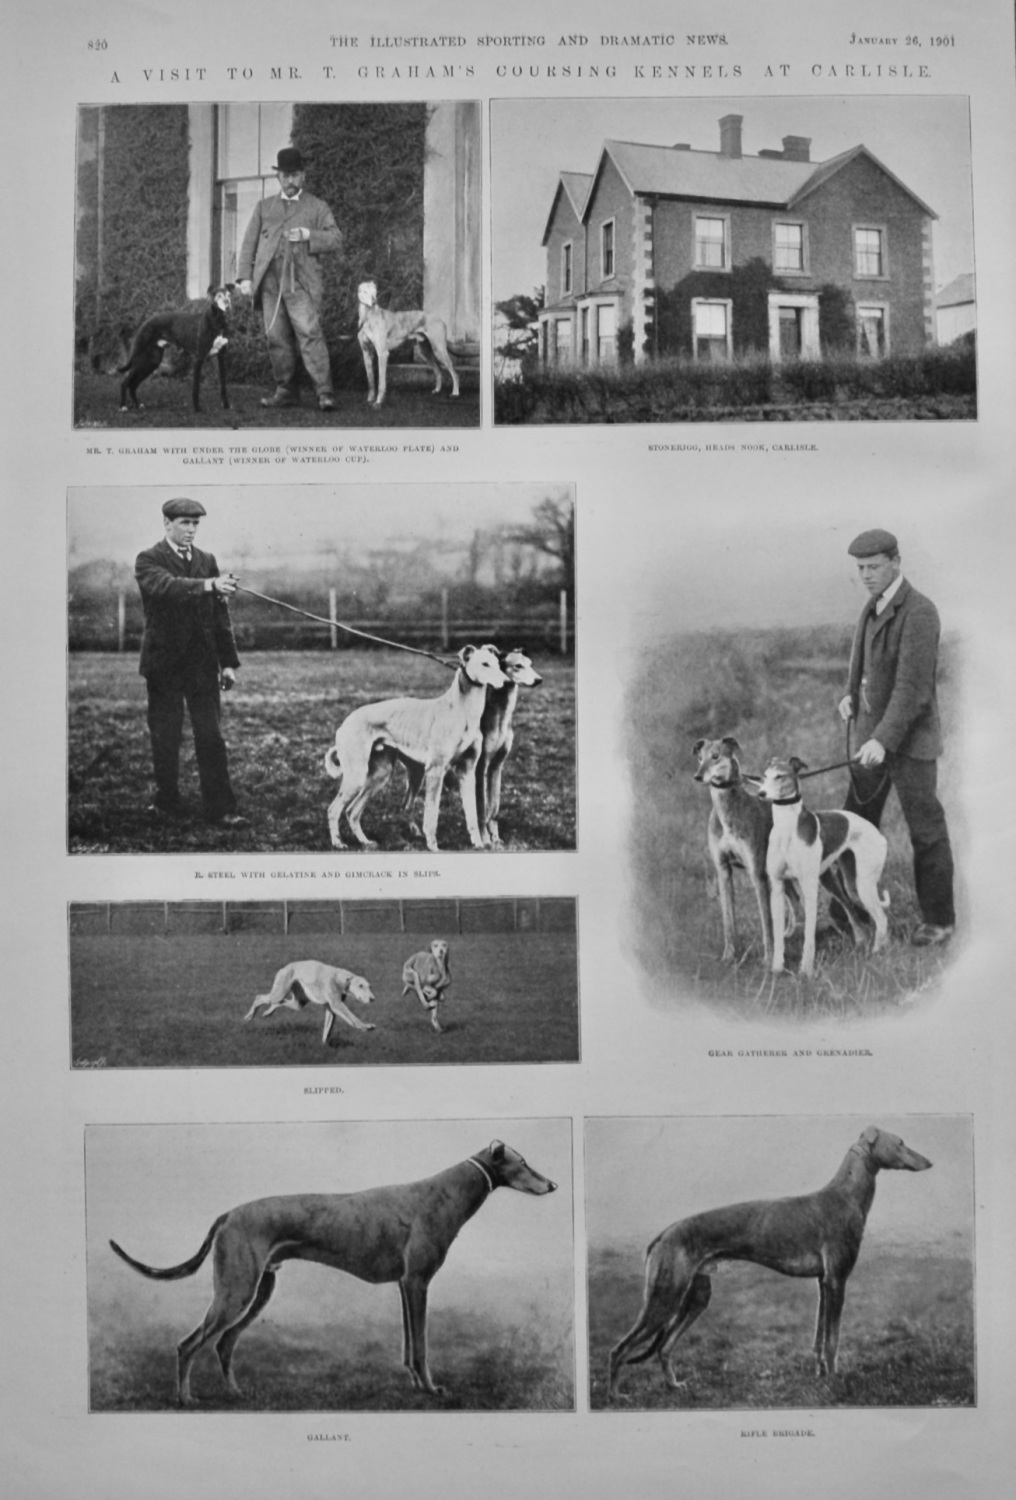 A Visit to Mr. T. Graham's Coursing Kennels at Carlisle.  1901.